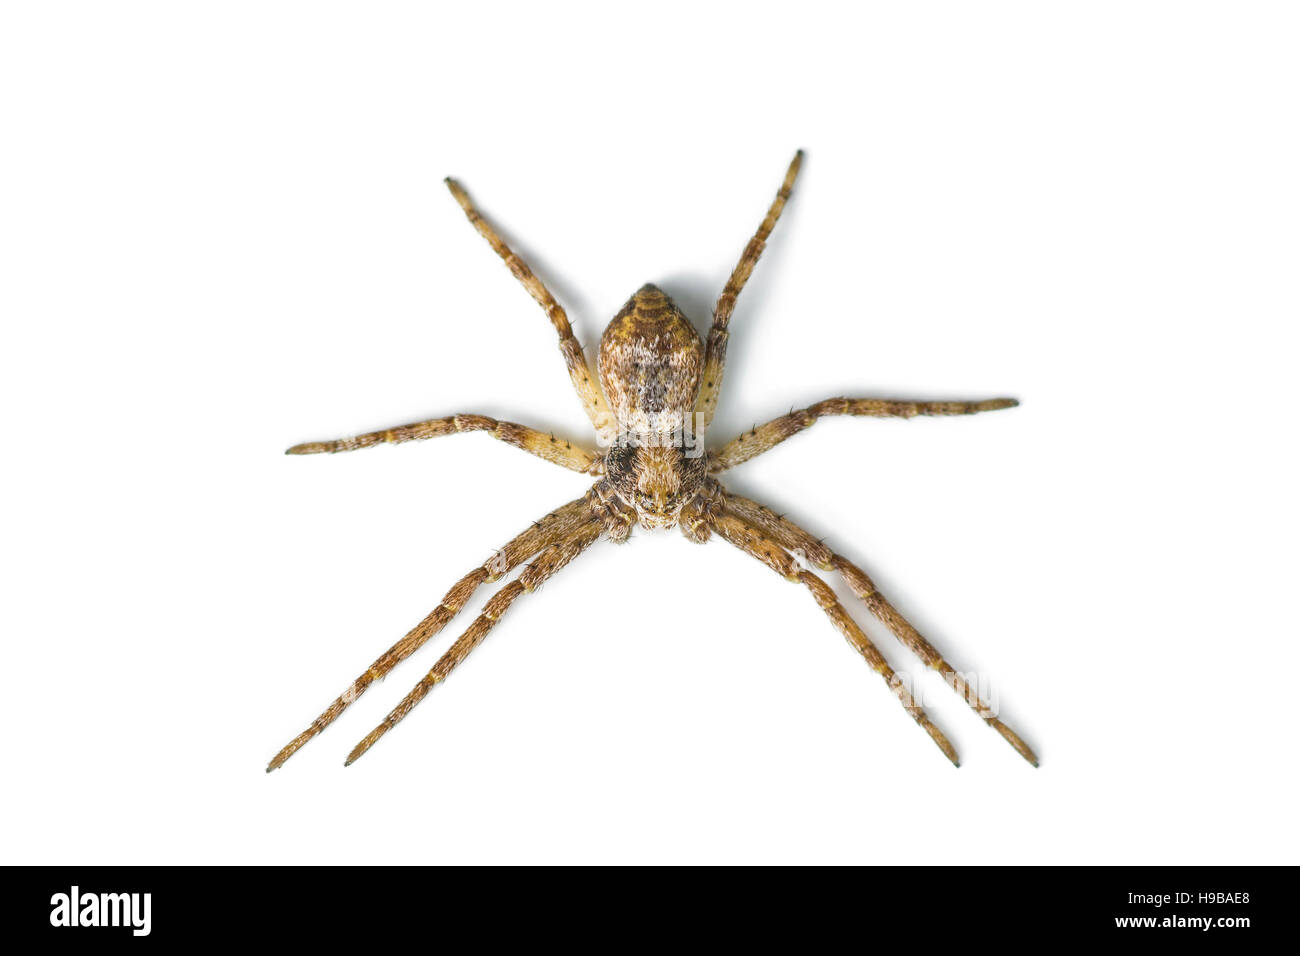 Spider Long-Legged isolated on White Banque D'Images